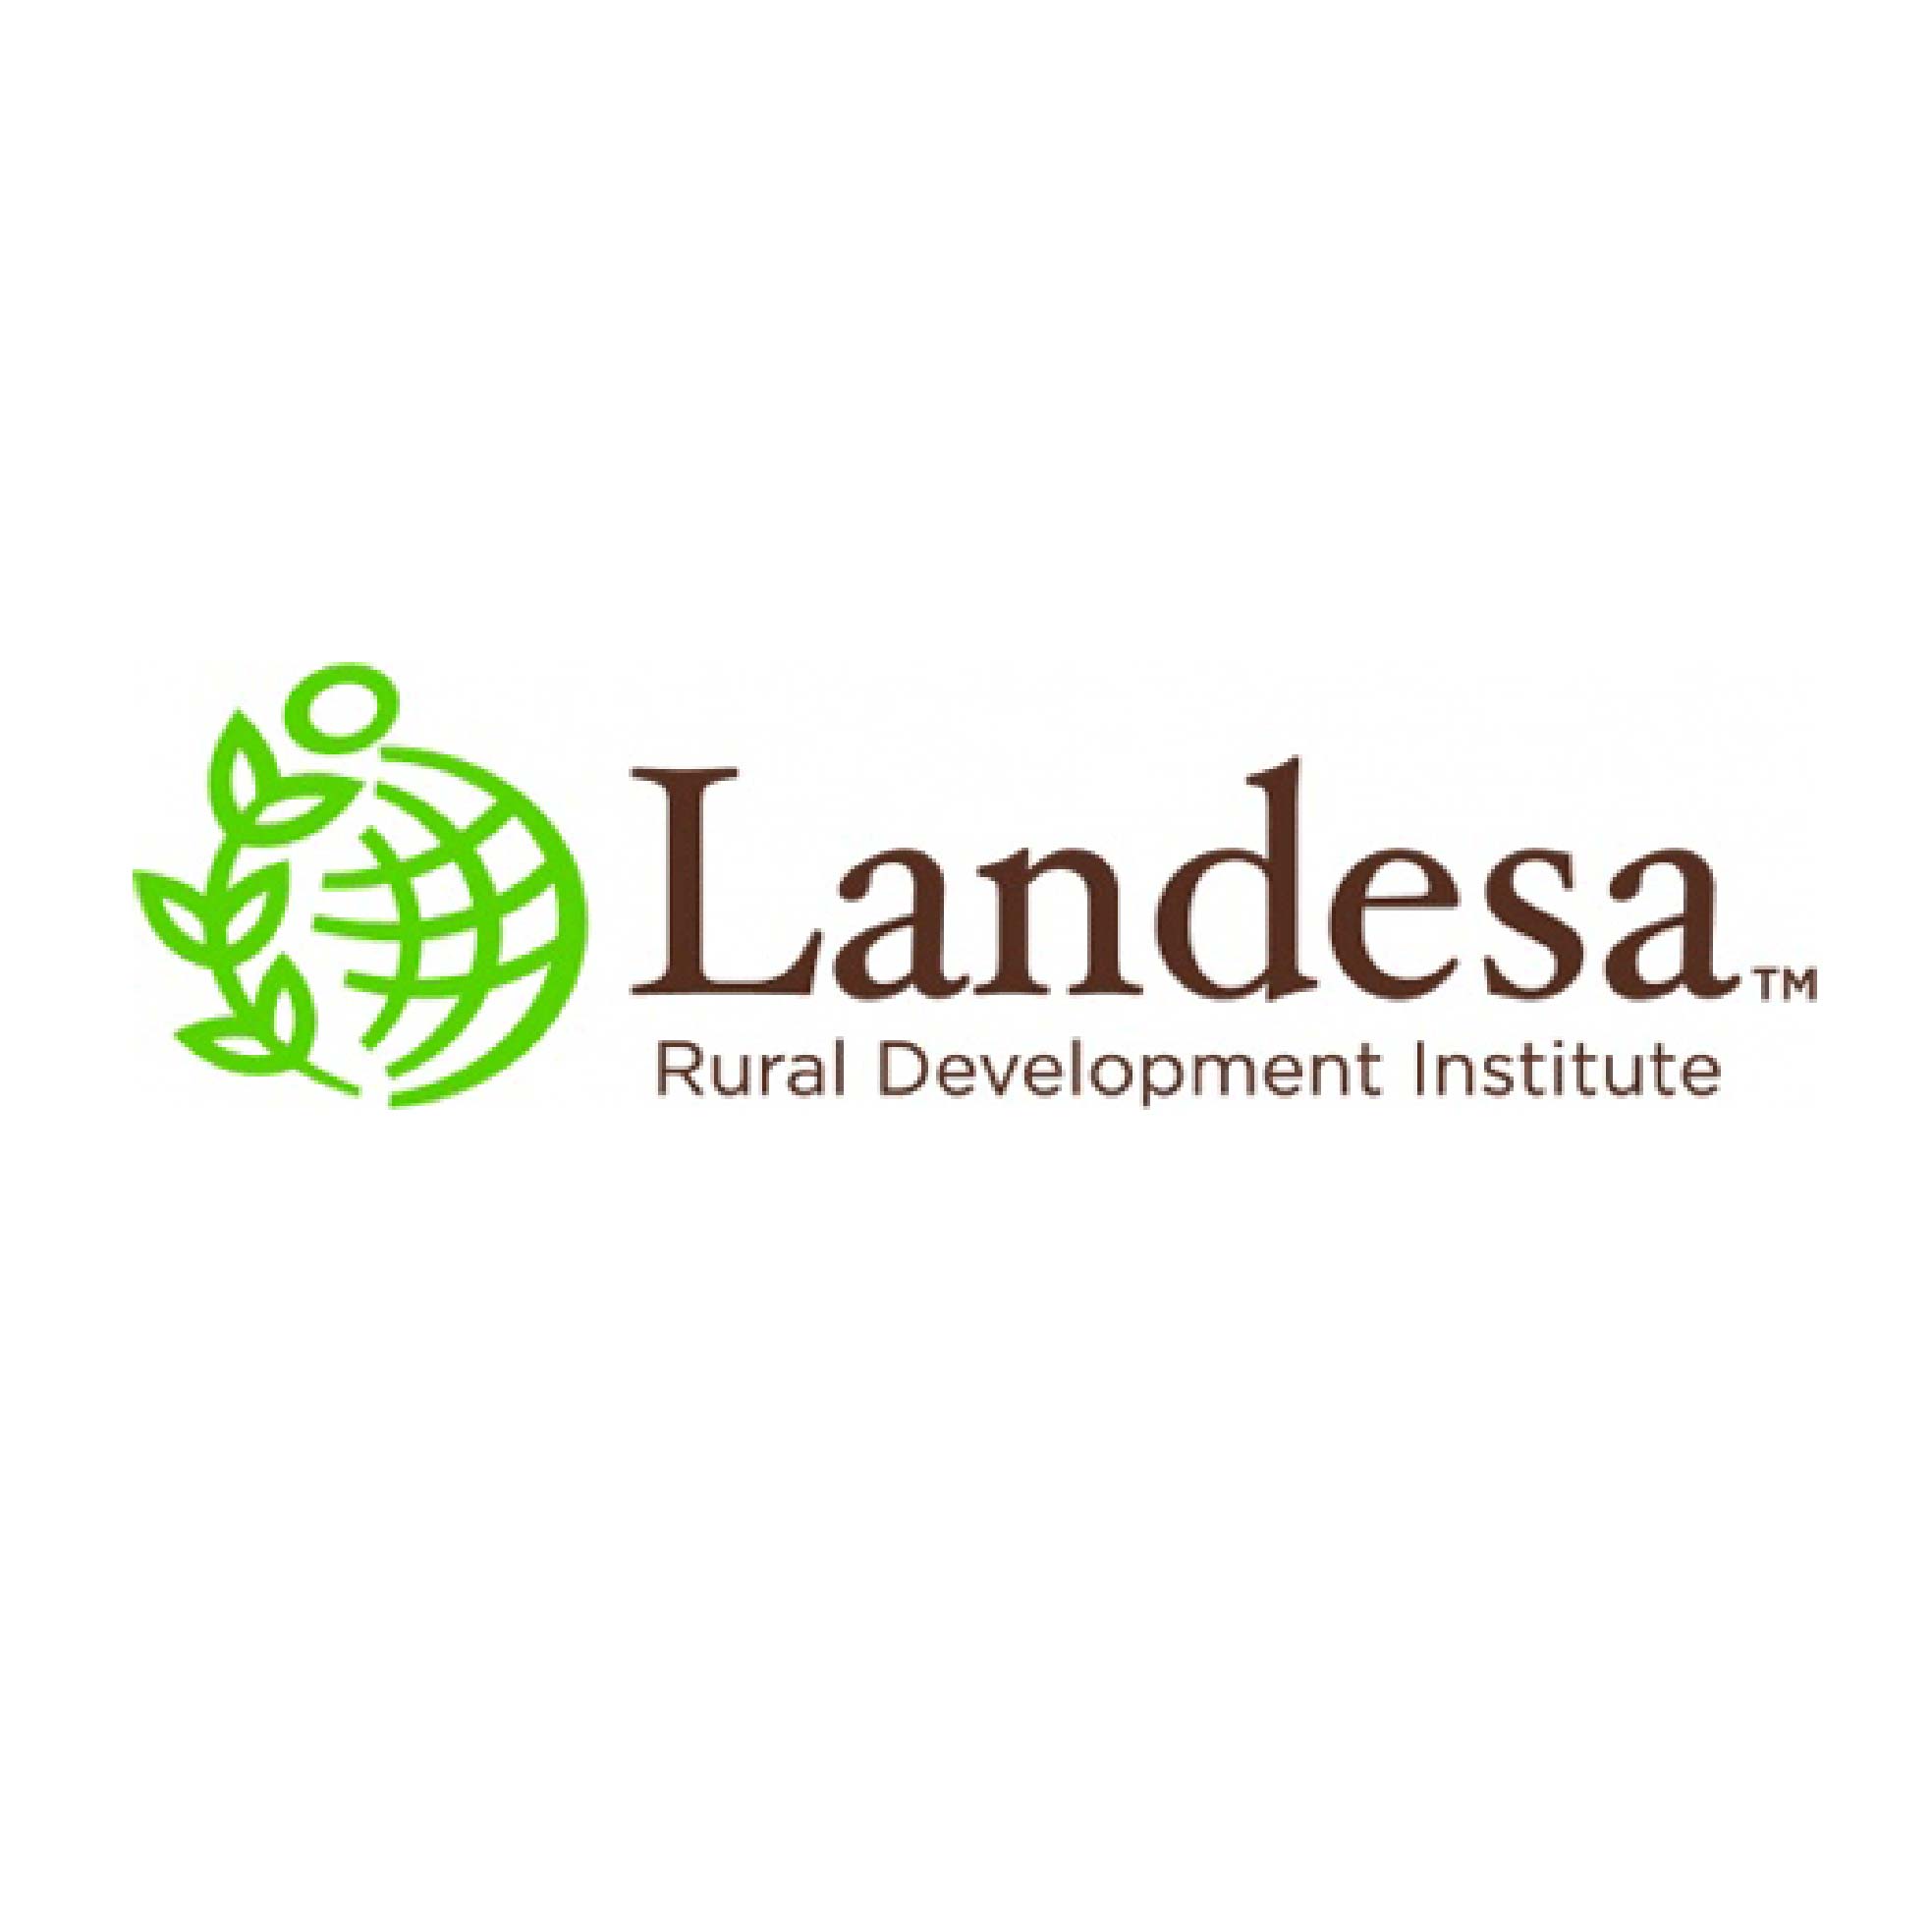 See the Change Cambodia 2023 – Landesa event